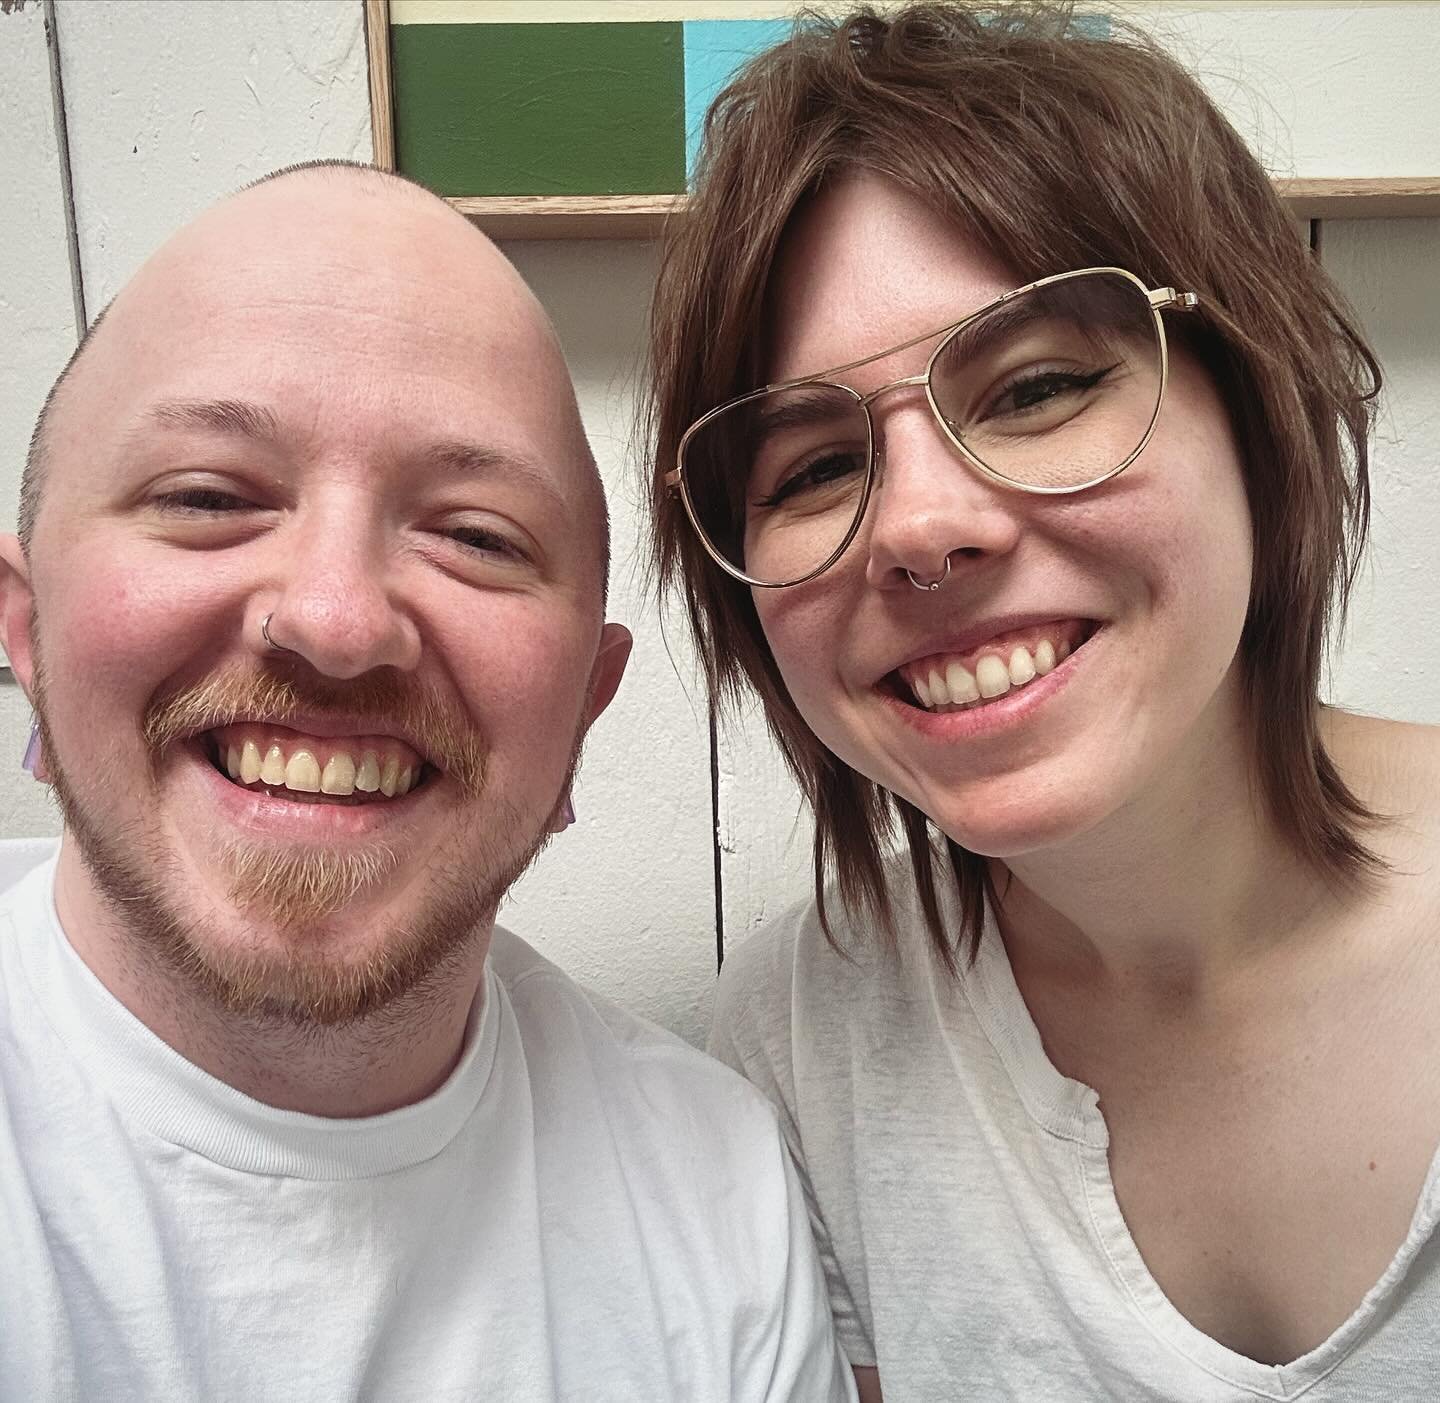 (Swipe for an opportunity!) Last week I had the great privilege of meeting up and connecting with @ashlen.hilliard of @peopleleavecults and I&rsquo;m so stoked about the awesome work they are doing. It&rsquo;s given me more thought about another area